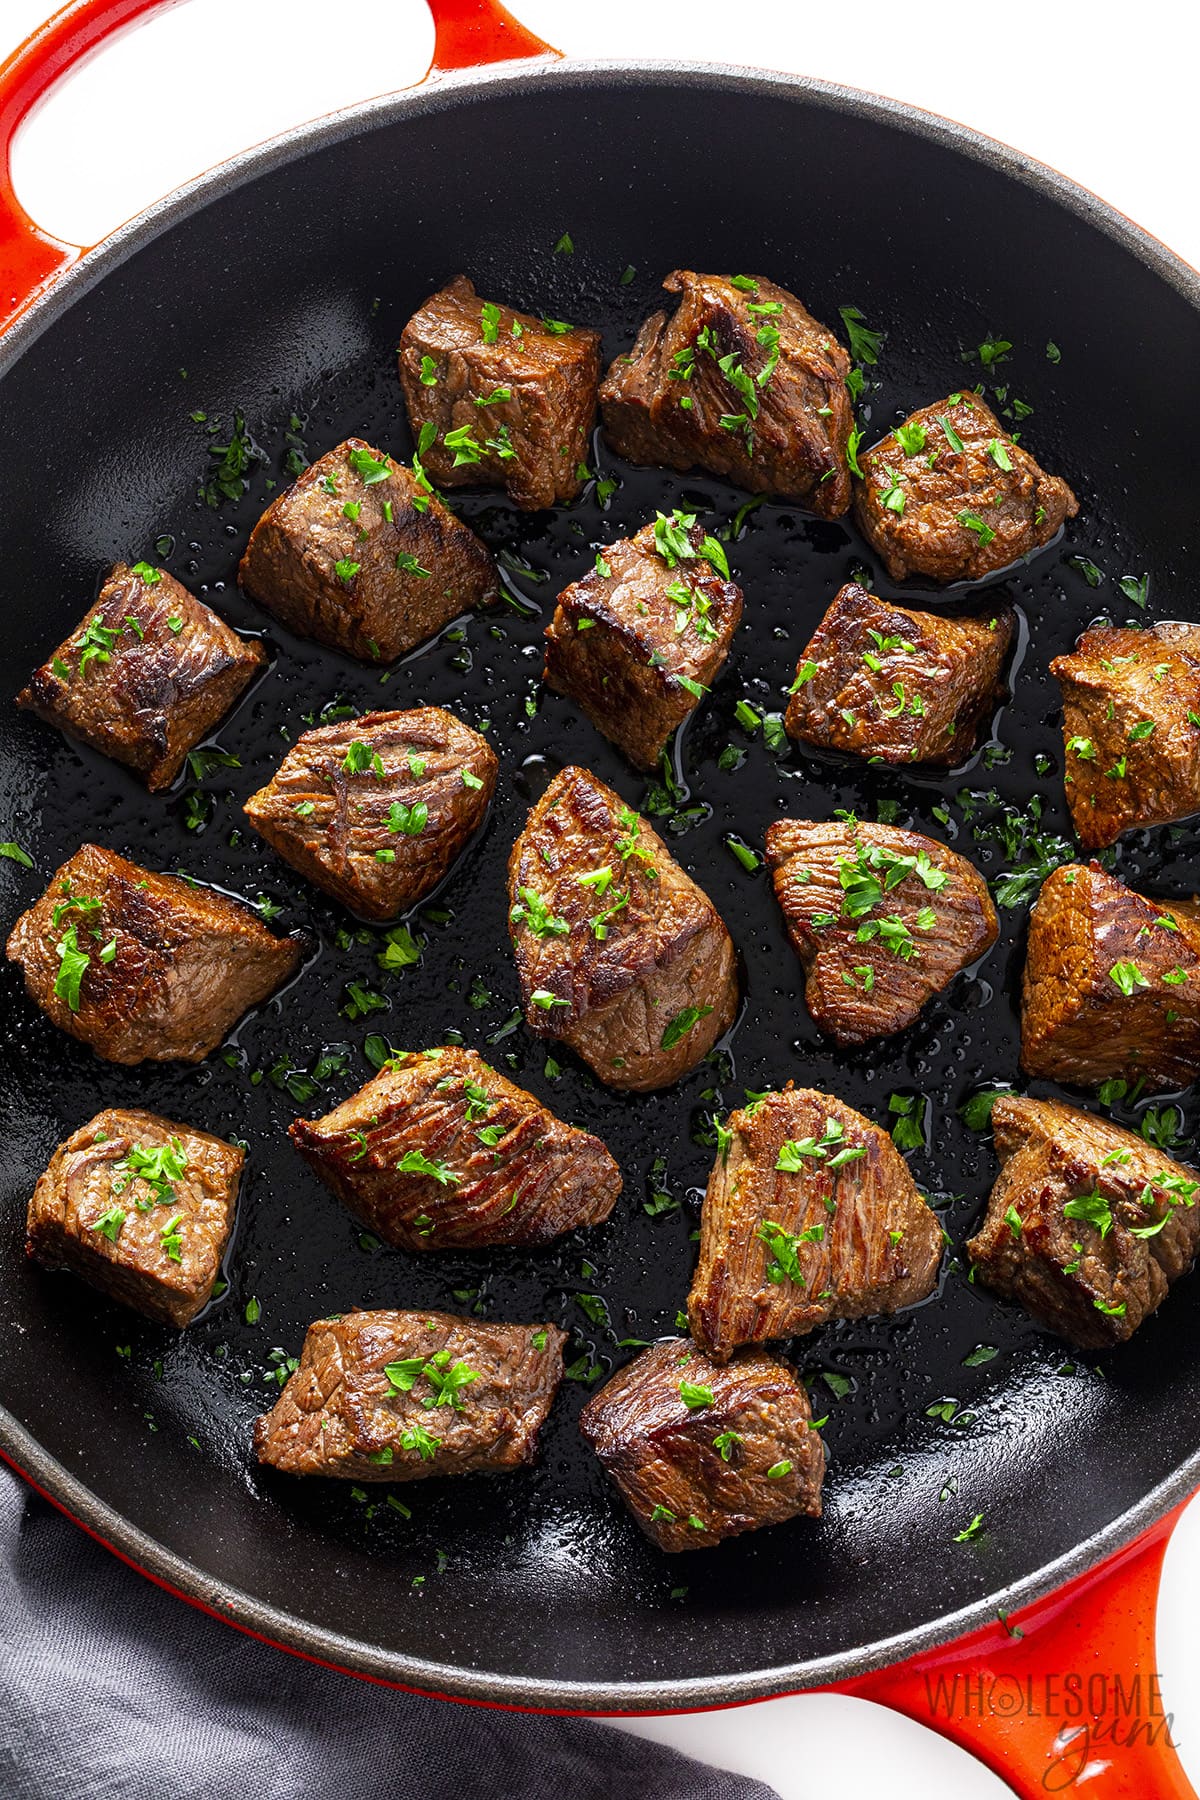 Sirloin tips in a cast iron skillet.